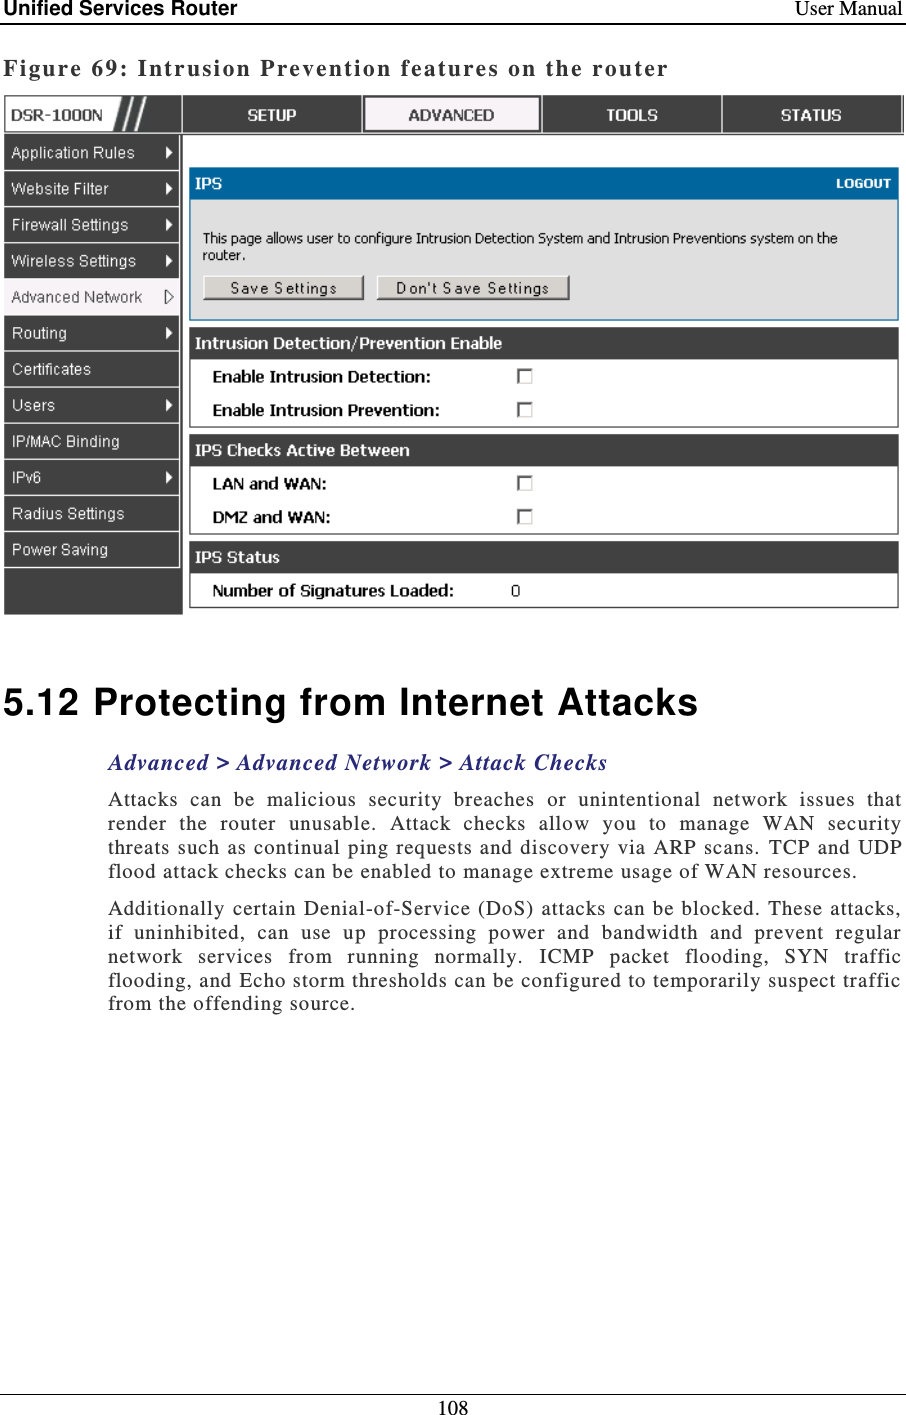 Unified Services Router    User Manual 108  Figure 69: Intr usi on Prevention f eatures on the  router    5.12 Protecting from Internet Attacks Advanced &gt; Advanced Network &gt; Attack Checks Attacks  can  be  malicious  security  breaches  or  unintentional  network  issues  that render  the  router  unusable.  Attack  checks  allow  you  to  manage  WAN  security threats  such  as  continual ping requests and discovery  via ARP scans.  TCP  and UDP flood attack checks can be enabled to manage extreme usage of WAN resources.   Additionally certain Denial-of-Service (DoS) attacks can  be  blocked. These attacks, if  uninhibited,  can  use  up  processing  power  and  bandwidth  and  prevent  regular network  services  from  running  normally.  ICMP  packet  flooding,  SYN  traffic flooding, and Echo storm thresholds can be configured to temporarily suspect traffic from the offending source.  